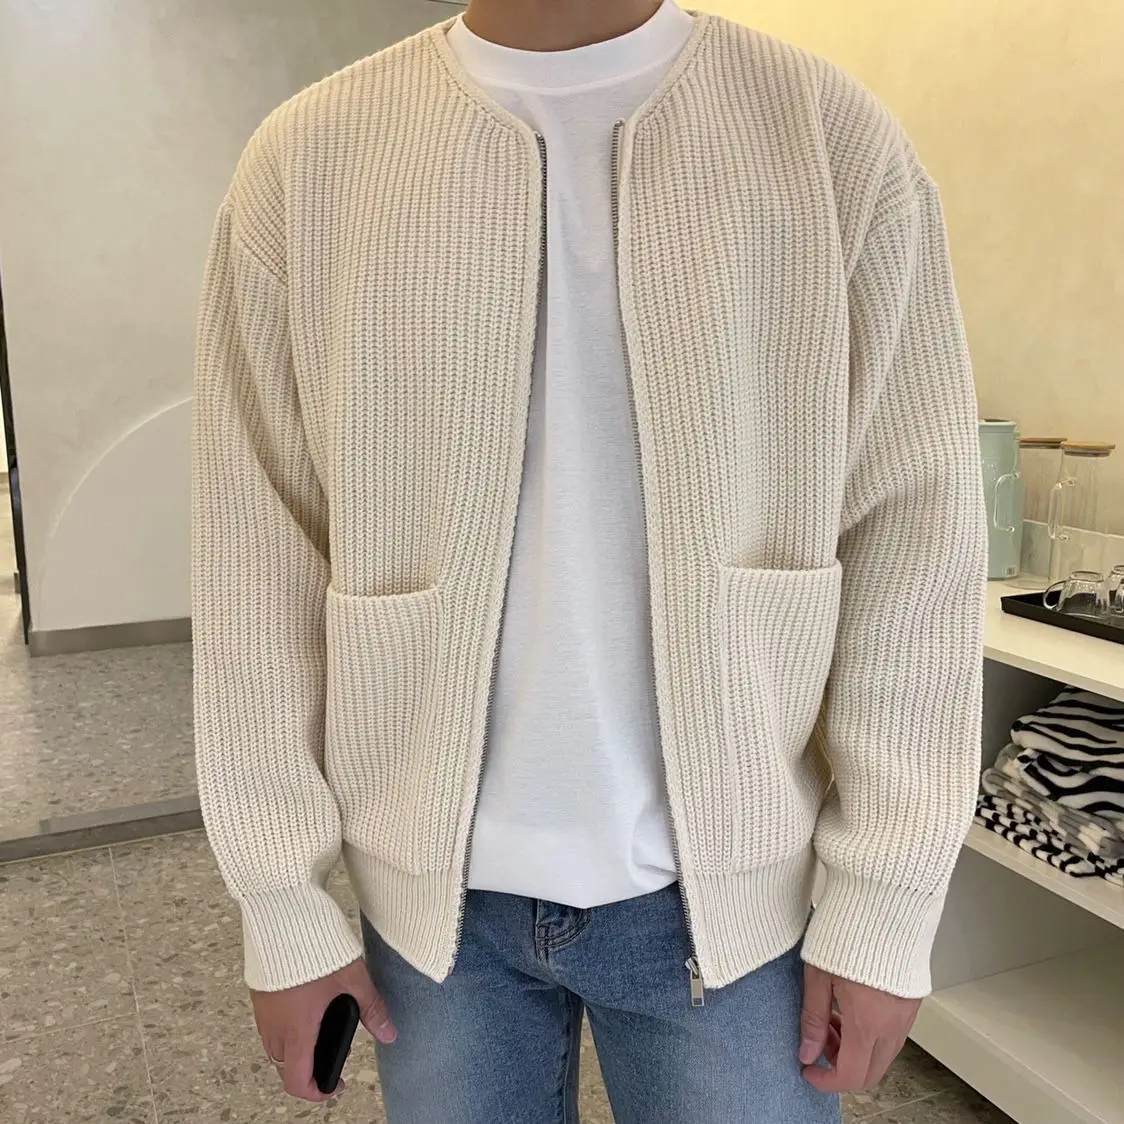 

2022 New Fashion Spring Autumn Knitted Cardigan Men Casual Sweater Long Sleeve Knitwear Slim Fitted Zippers Cardigans Male